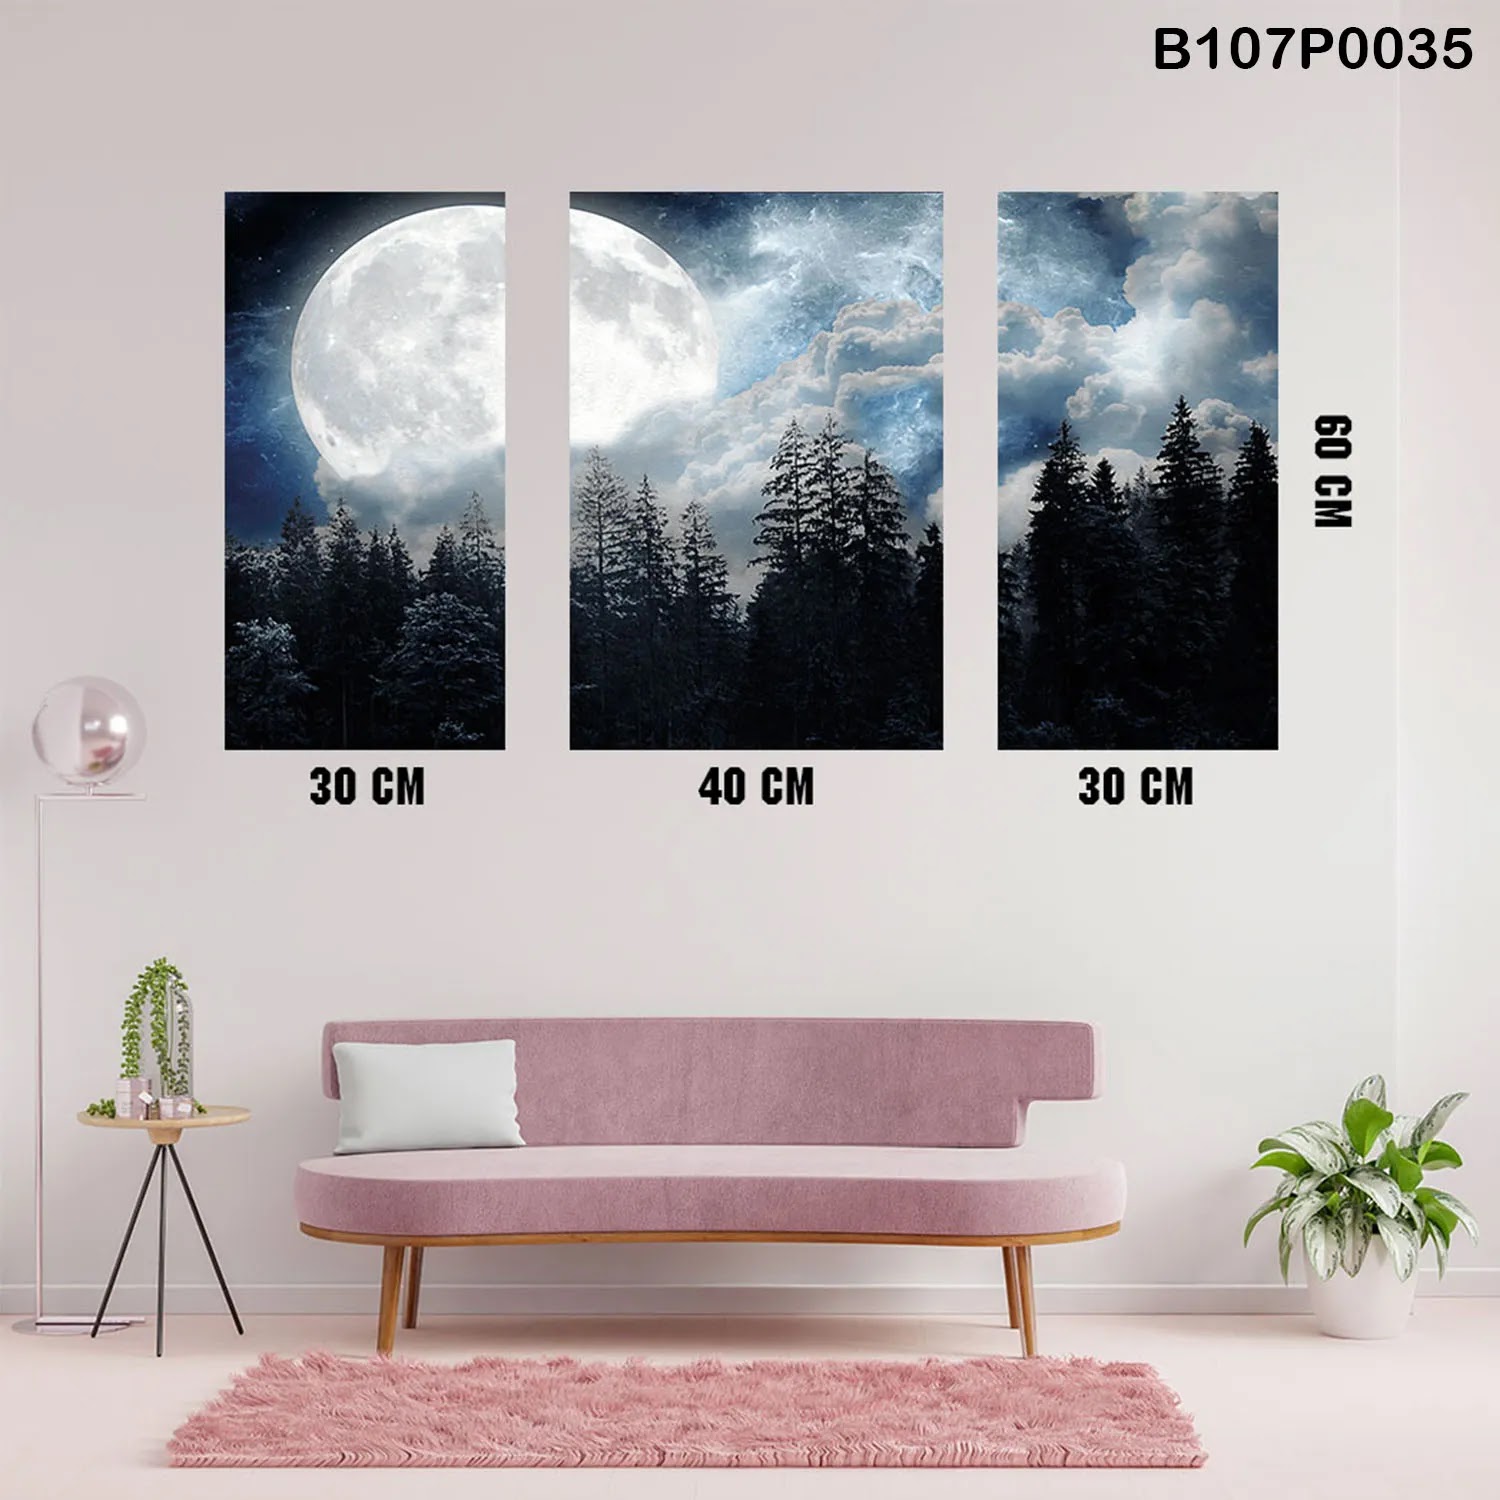 Triptych panel with clouds and moon at night